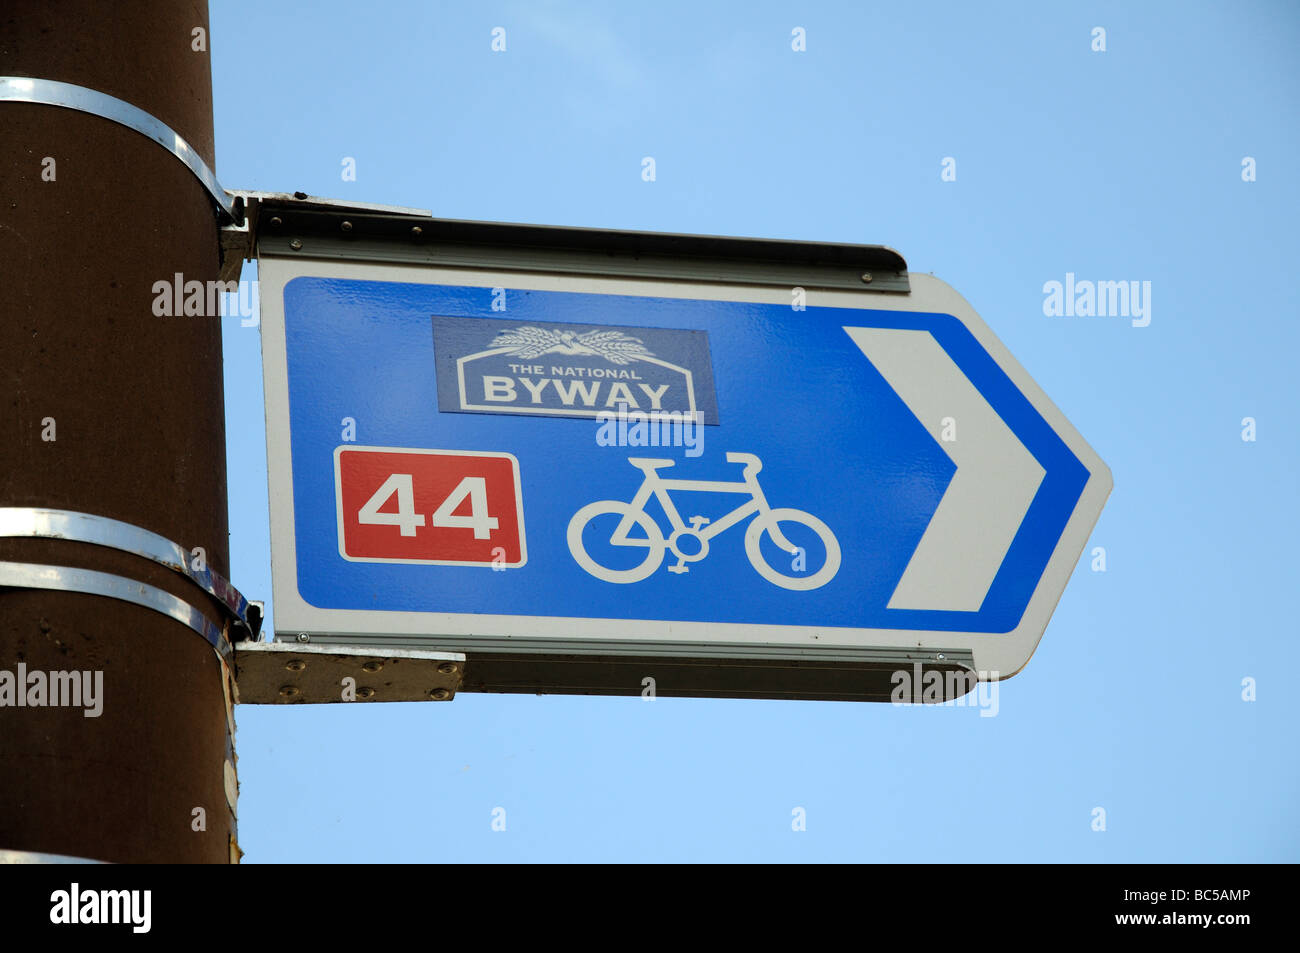 The National Byway cycle route sign against a blue sky Stock Photo